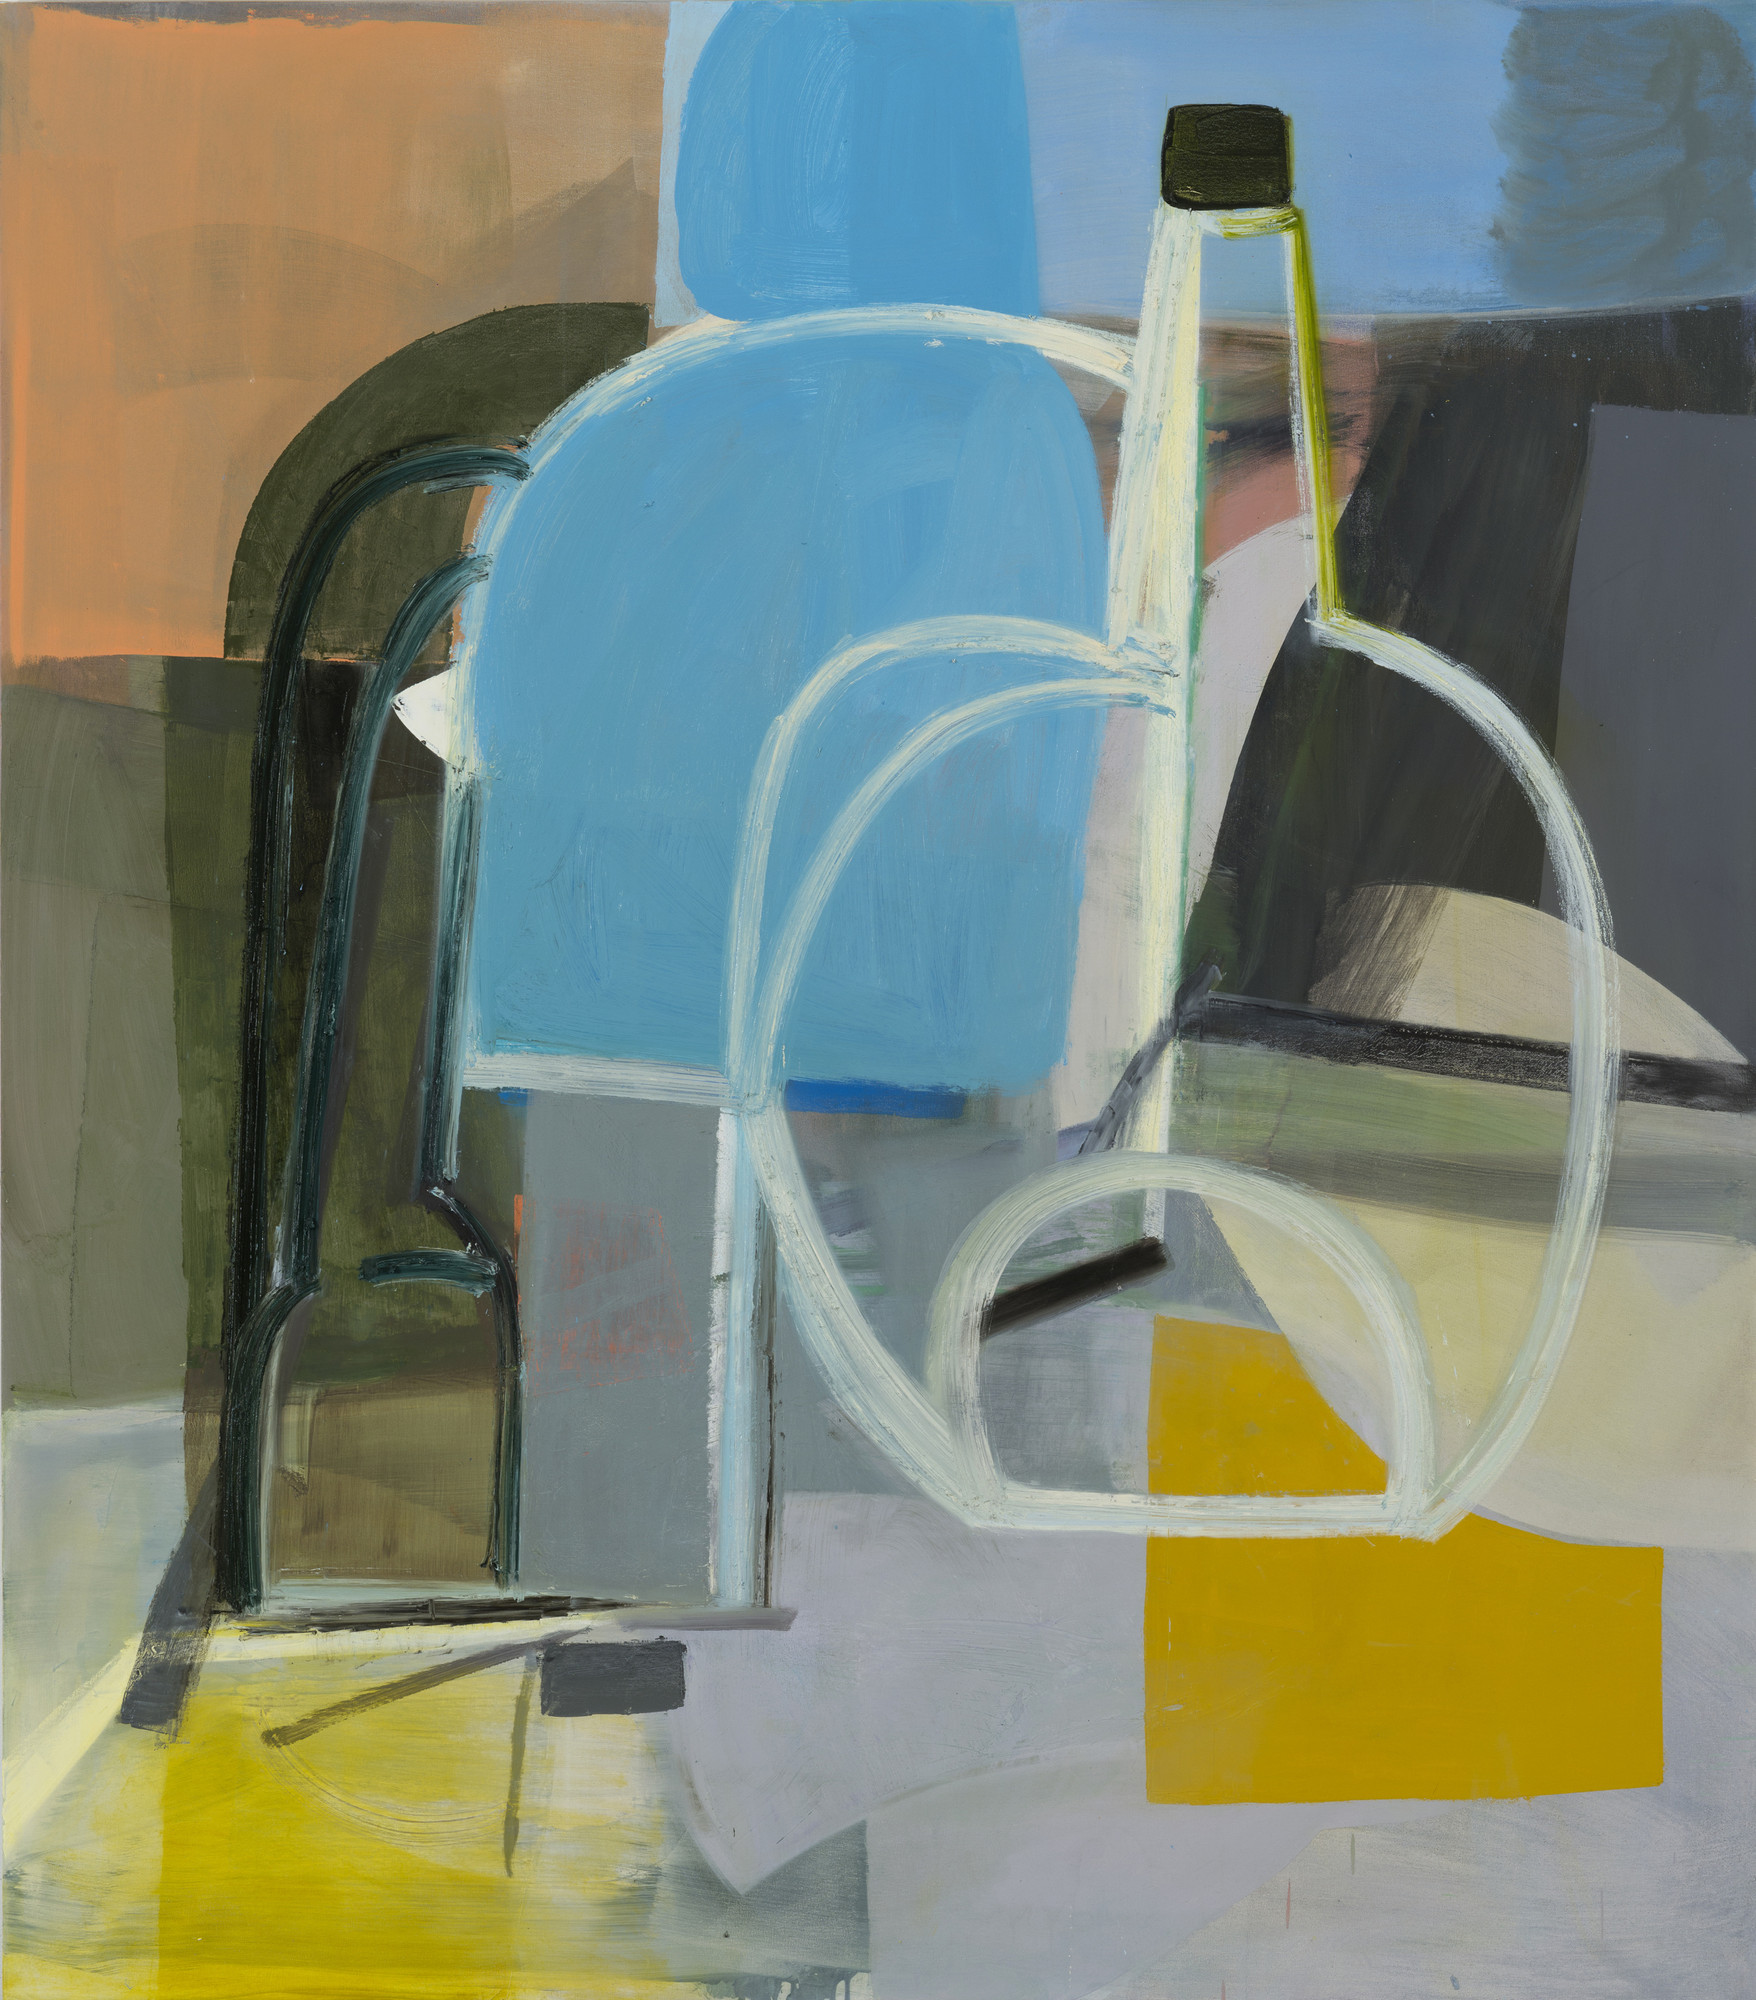 Amy Sillman's Breakthrough Moment Is Here - The New York Times